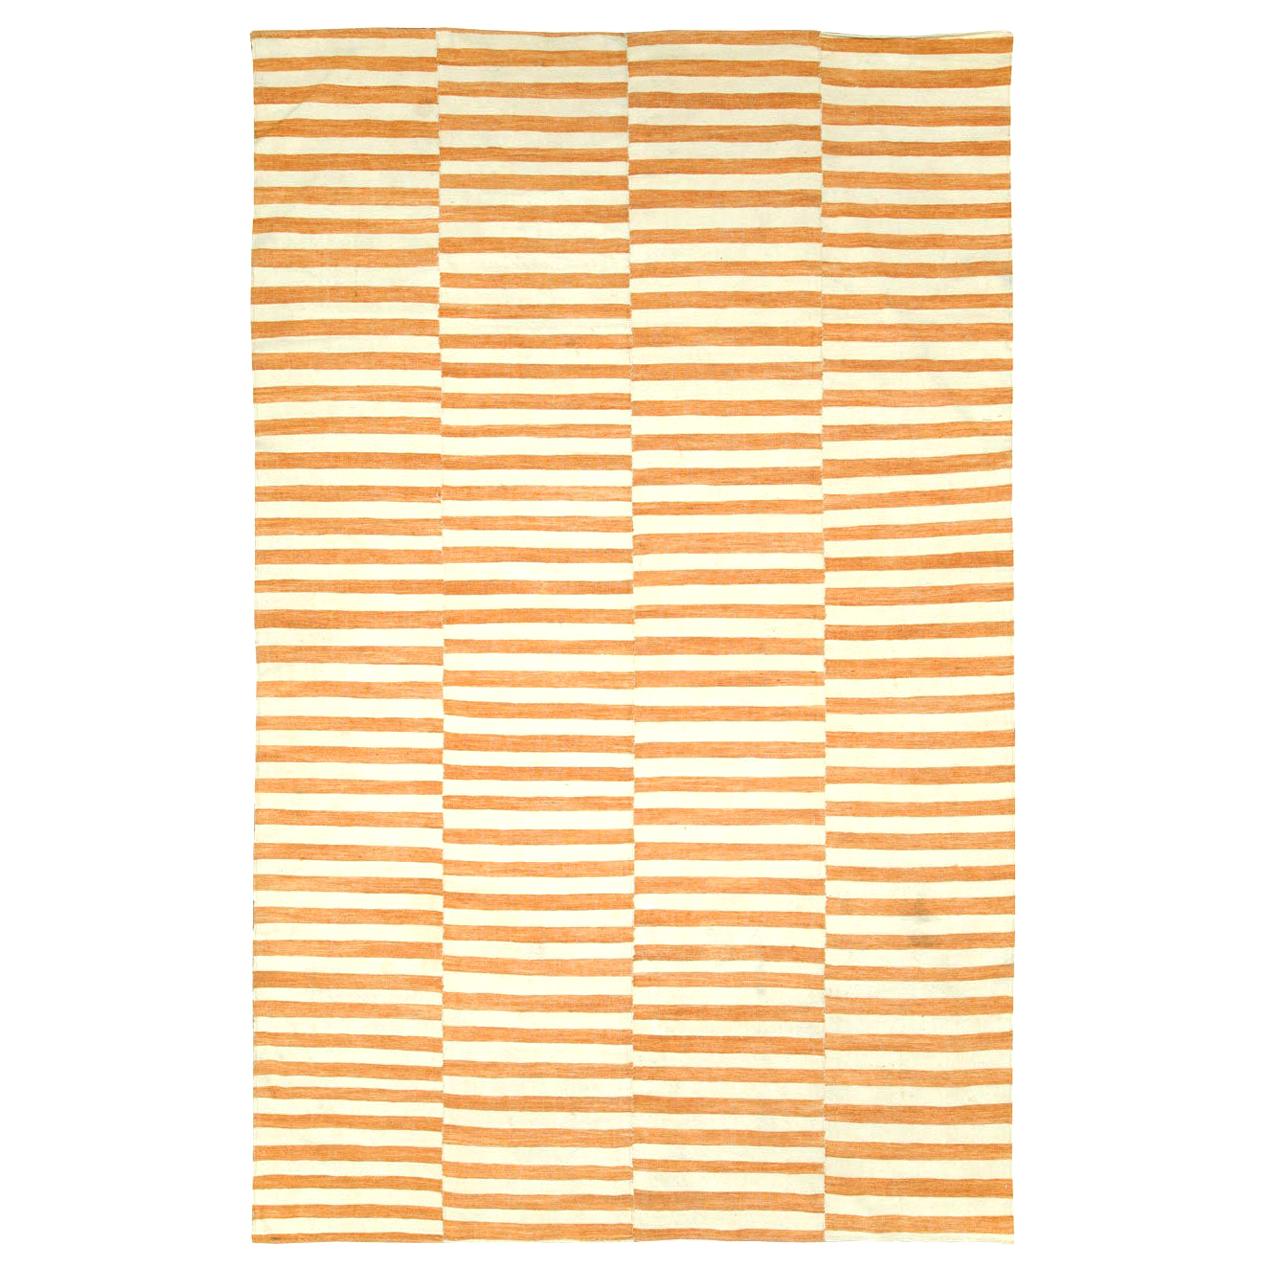 Mid-20th Century Handmade Turkish Flatweave Kilim Accent Rug in Sienna and Cream For Sale